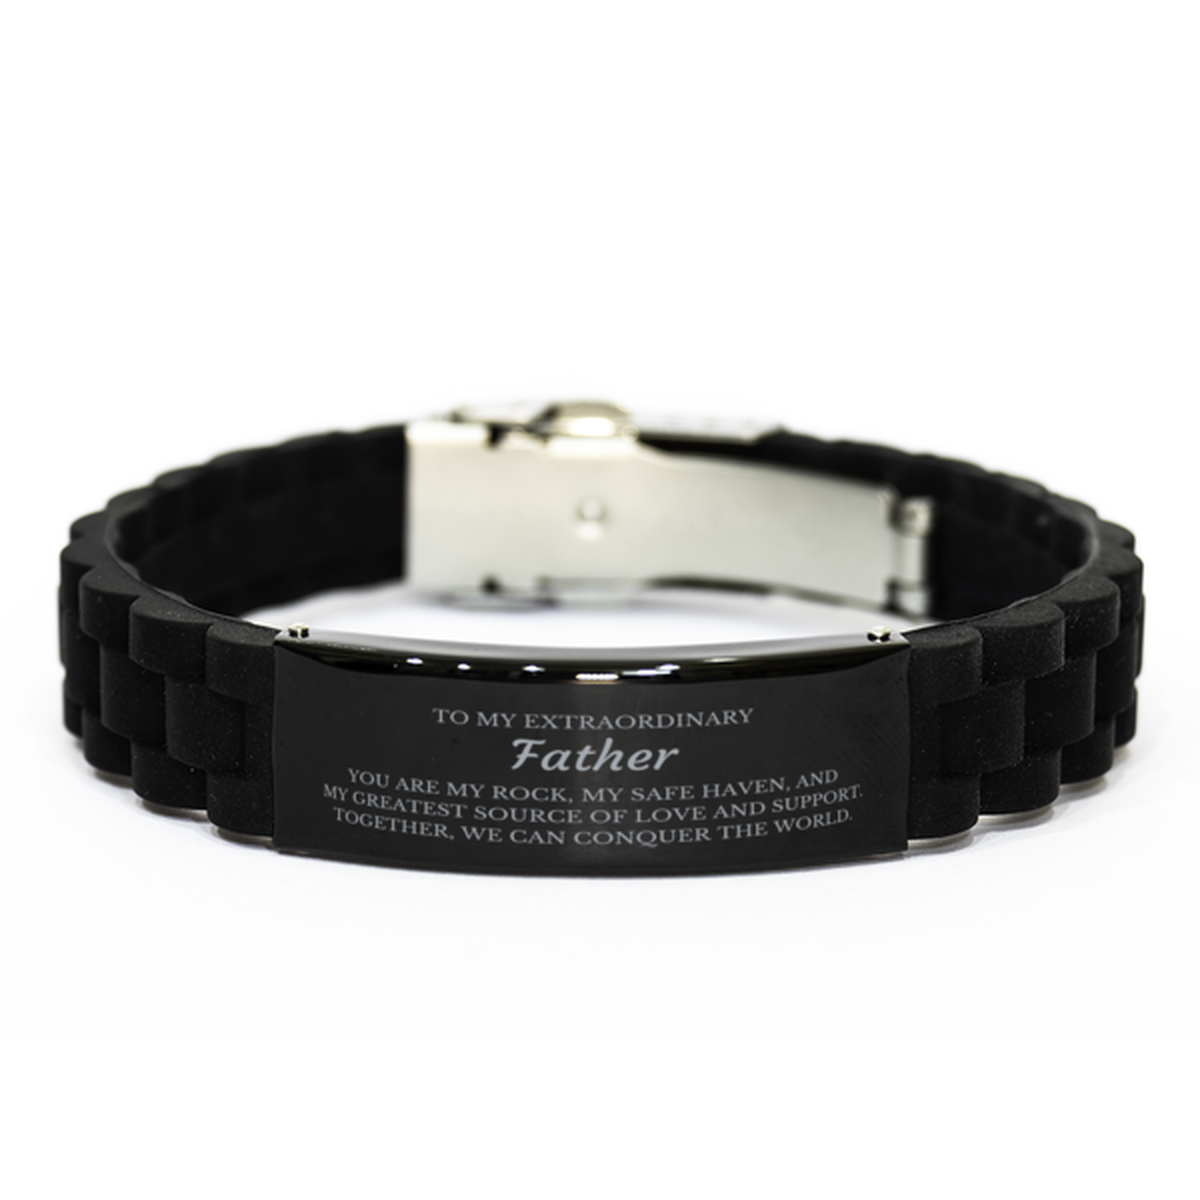 To My Extraordinary Father Gifts, Together, we can conquer the world, Birthday Black Glidelock Clasp Bracelet For Father, Christmas Gifts For Father